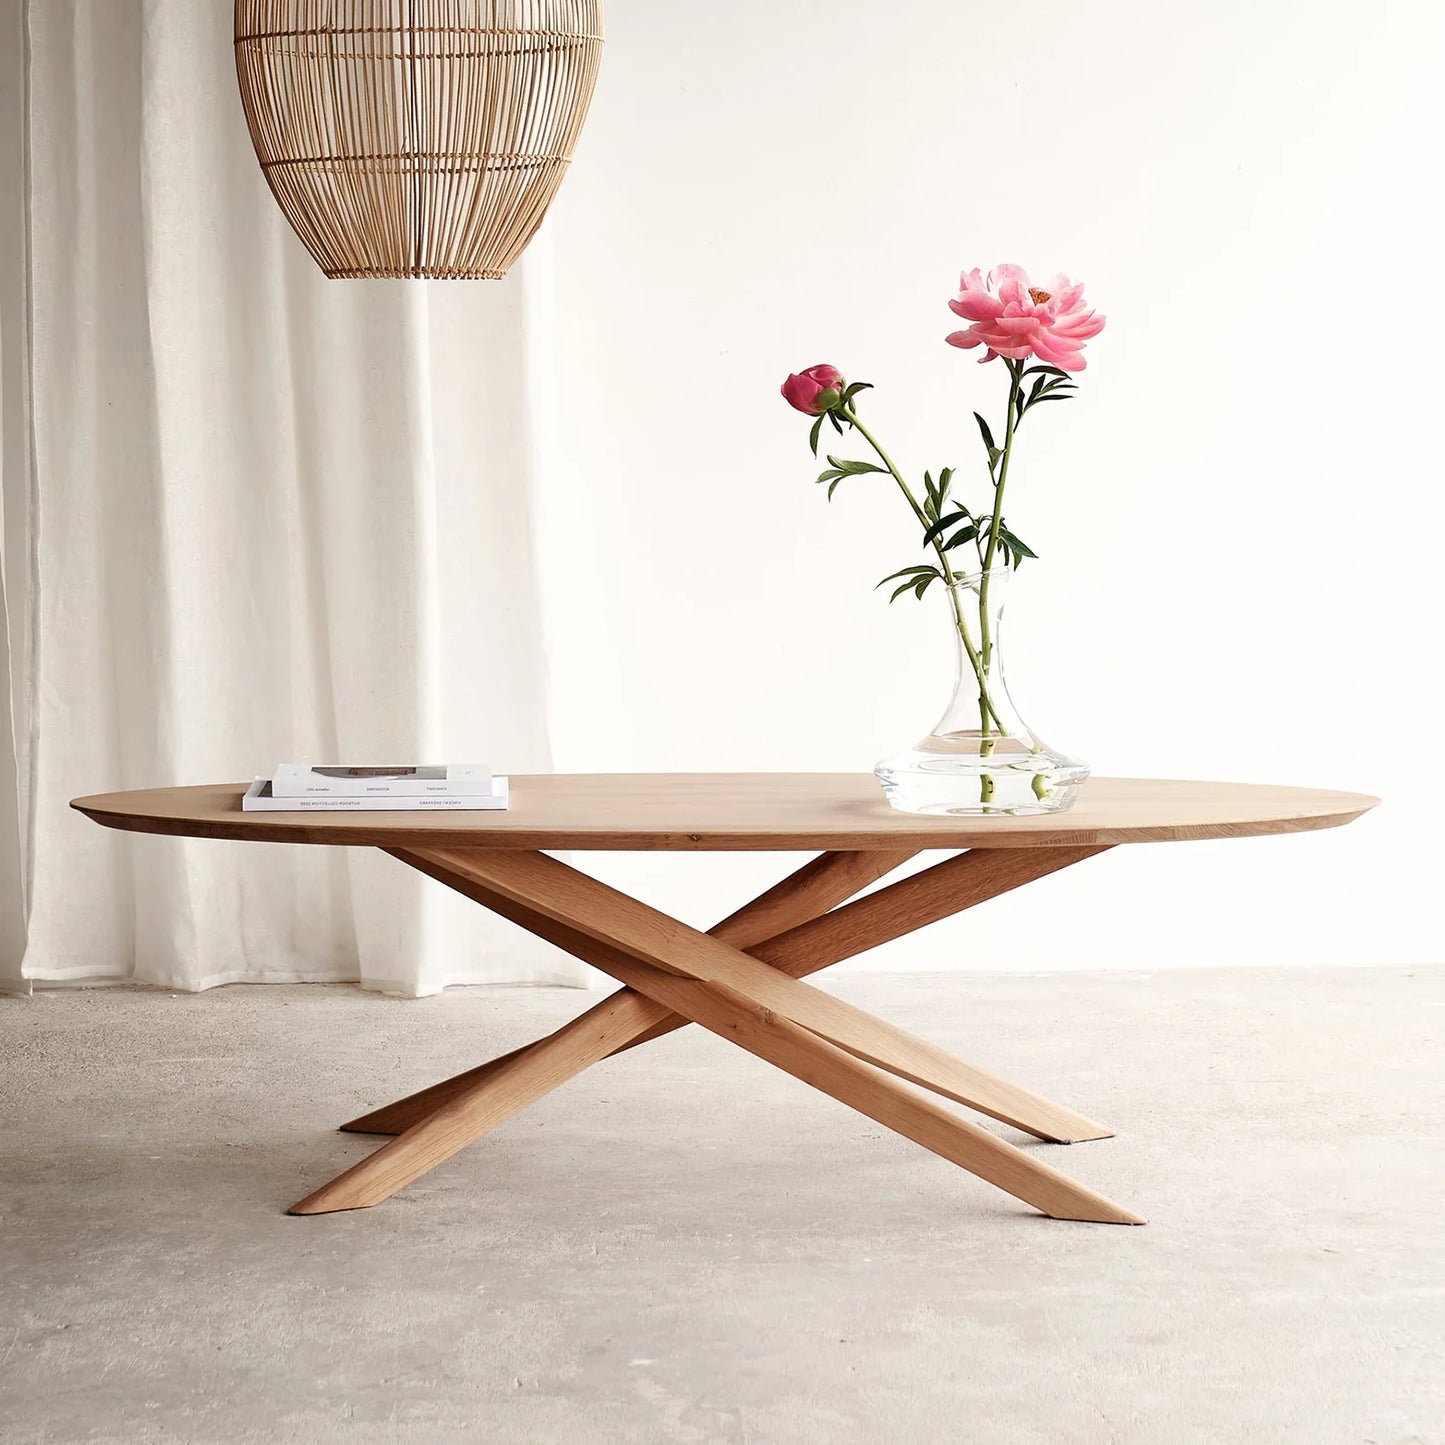 Ethnicraft Oak Mikado Oval Coffee Table available from Make Your House A Home, Bendigo, Victoria, Australia